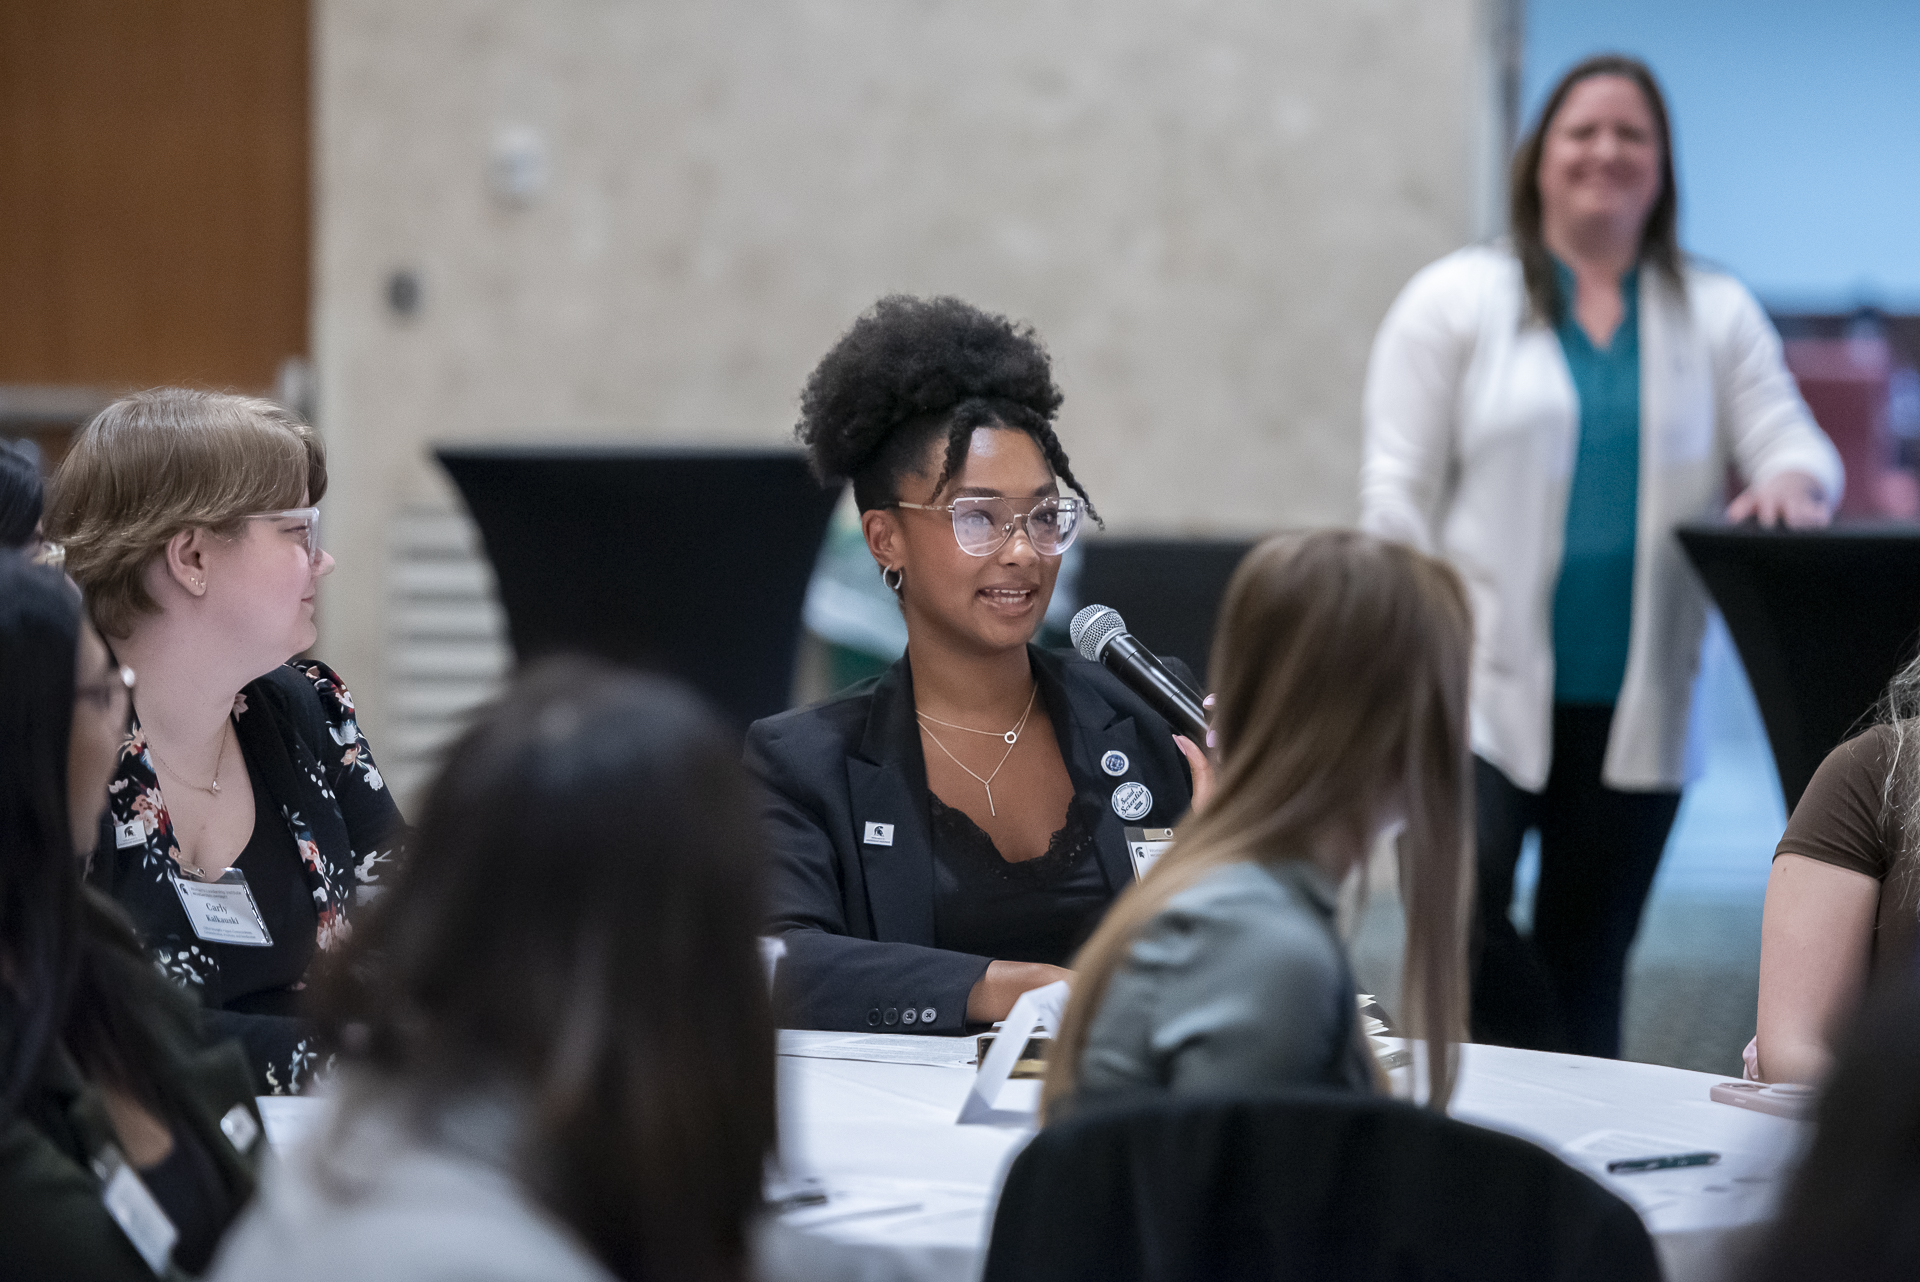 Women's Leadership Institute hosts Healthy Leadership, Support and Community panel, celebrates graduates